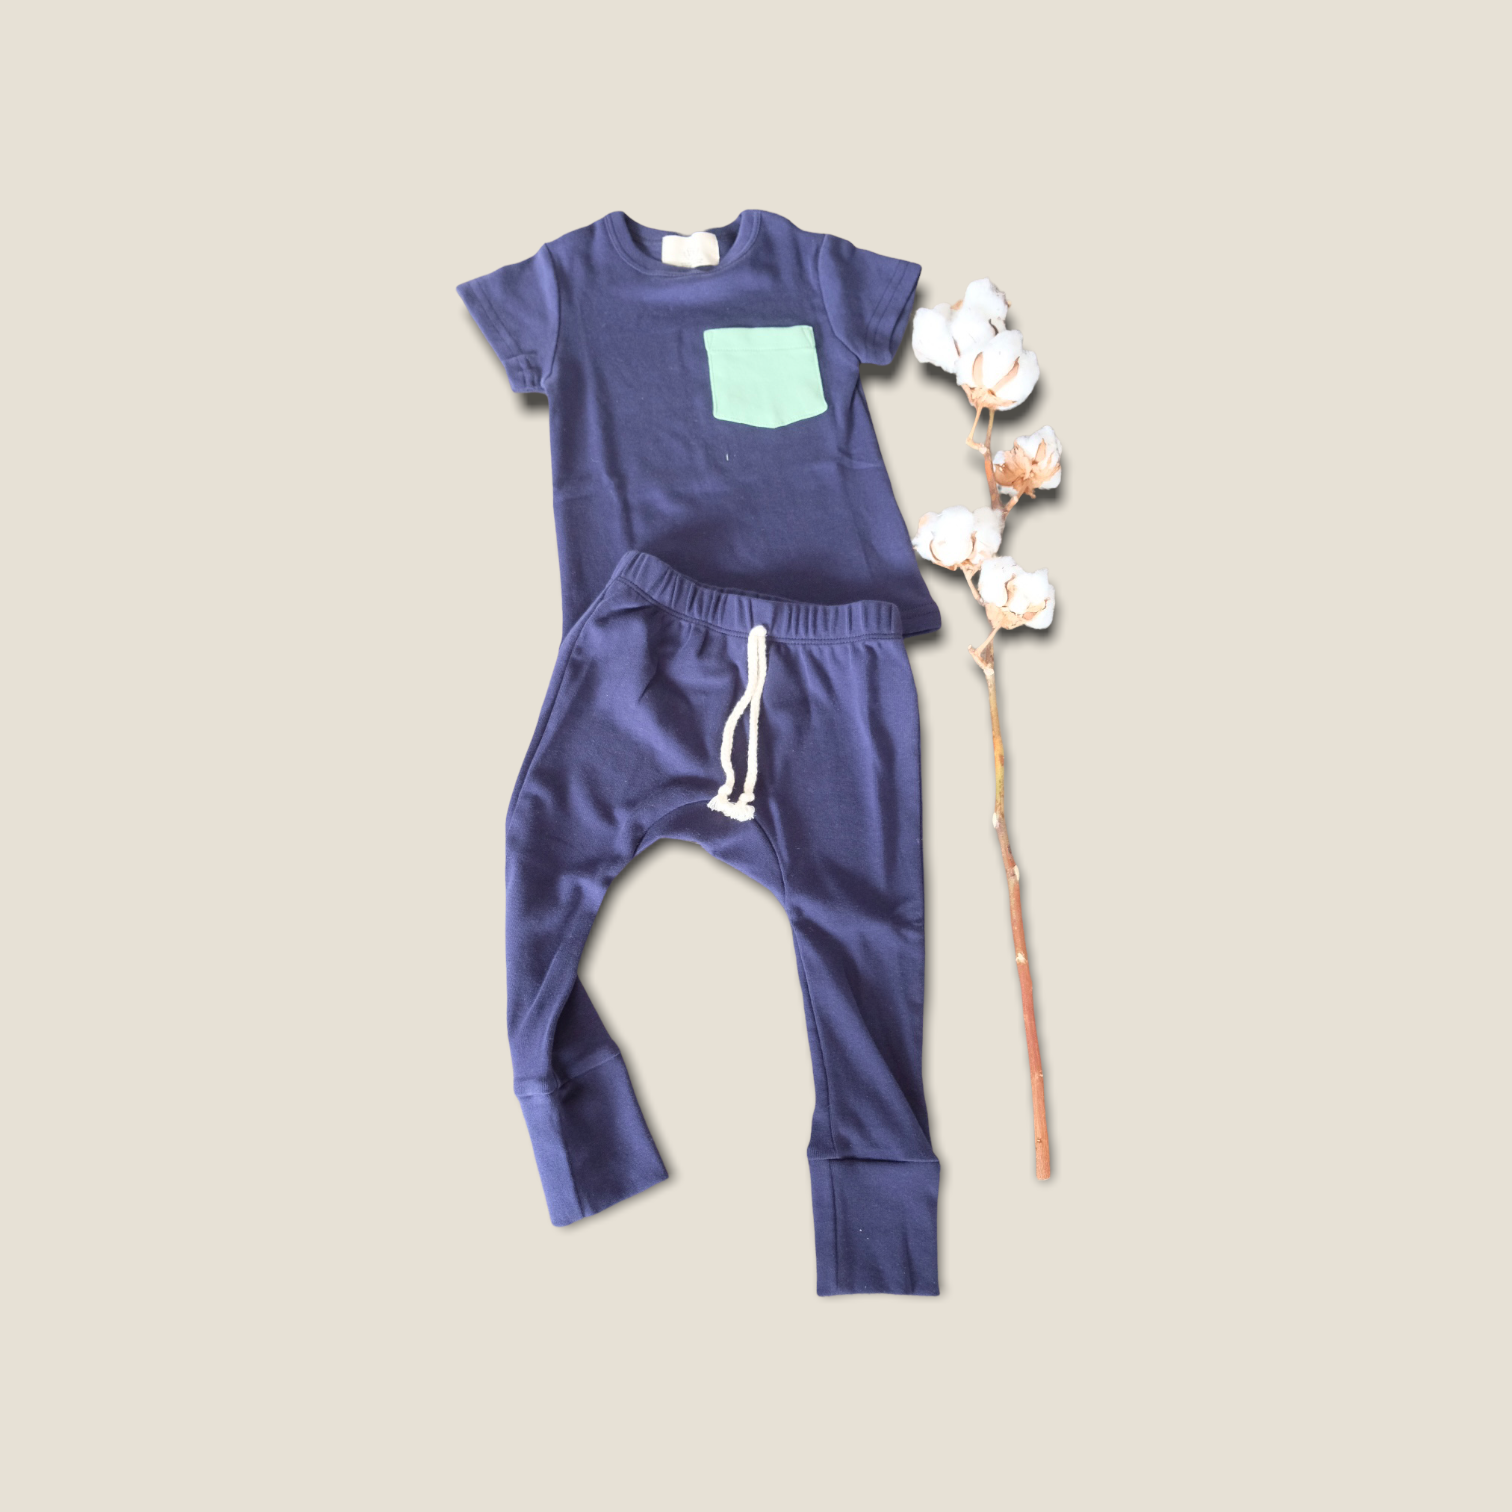 Pima cotton Tee and Pant set - Andean Blue